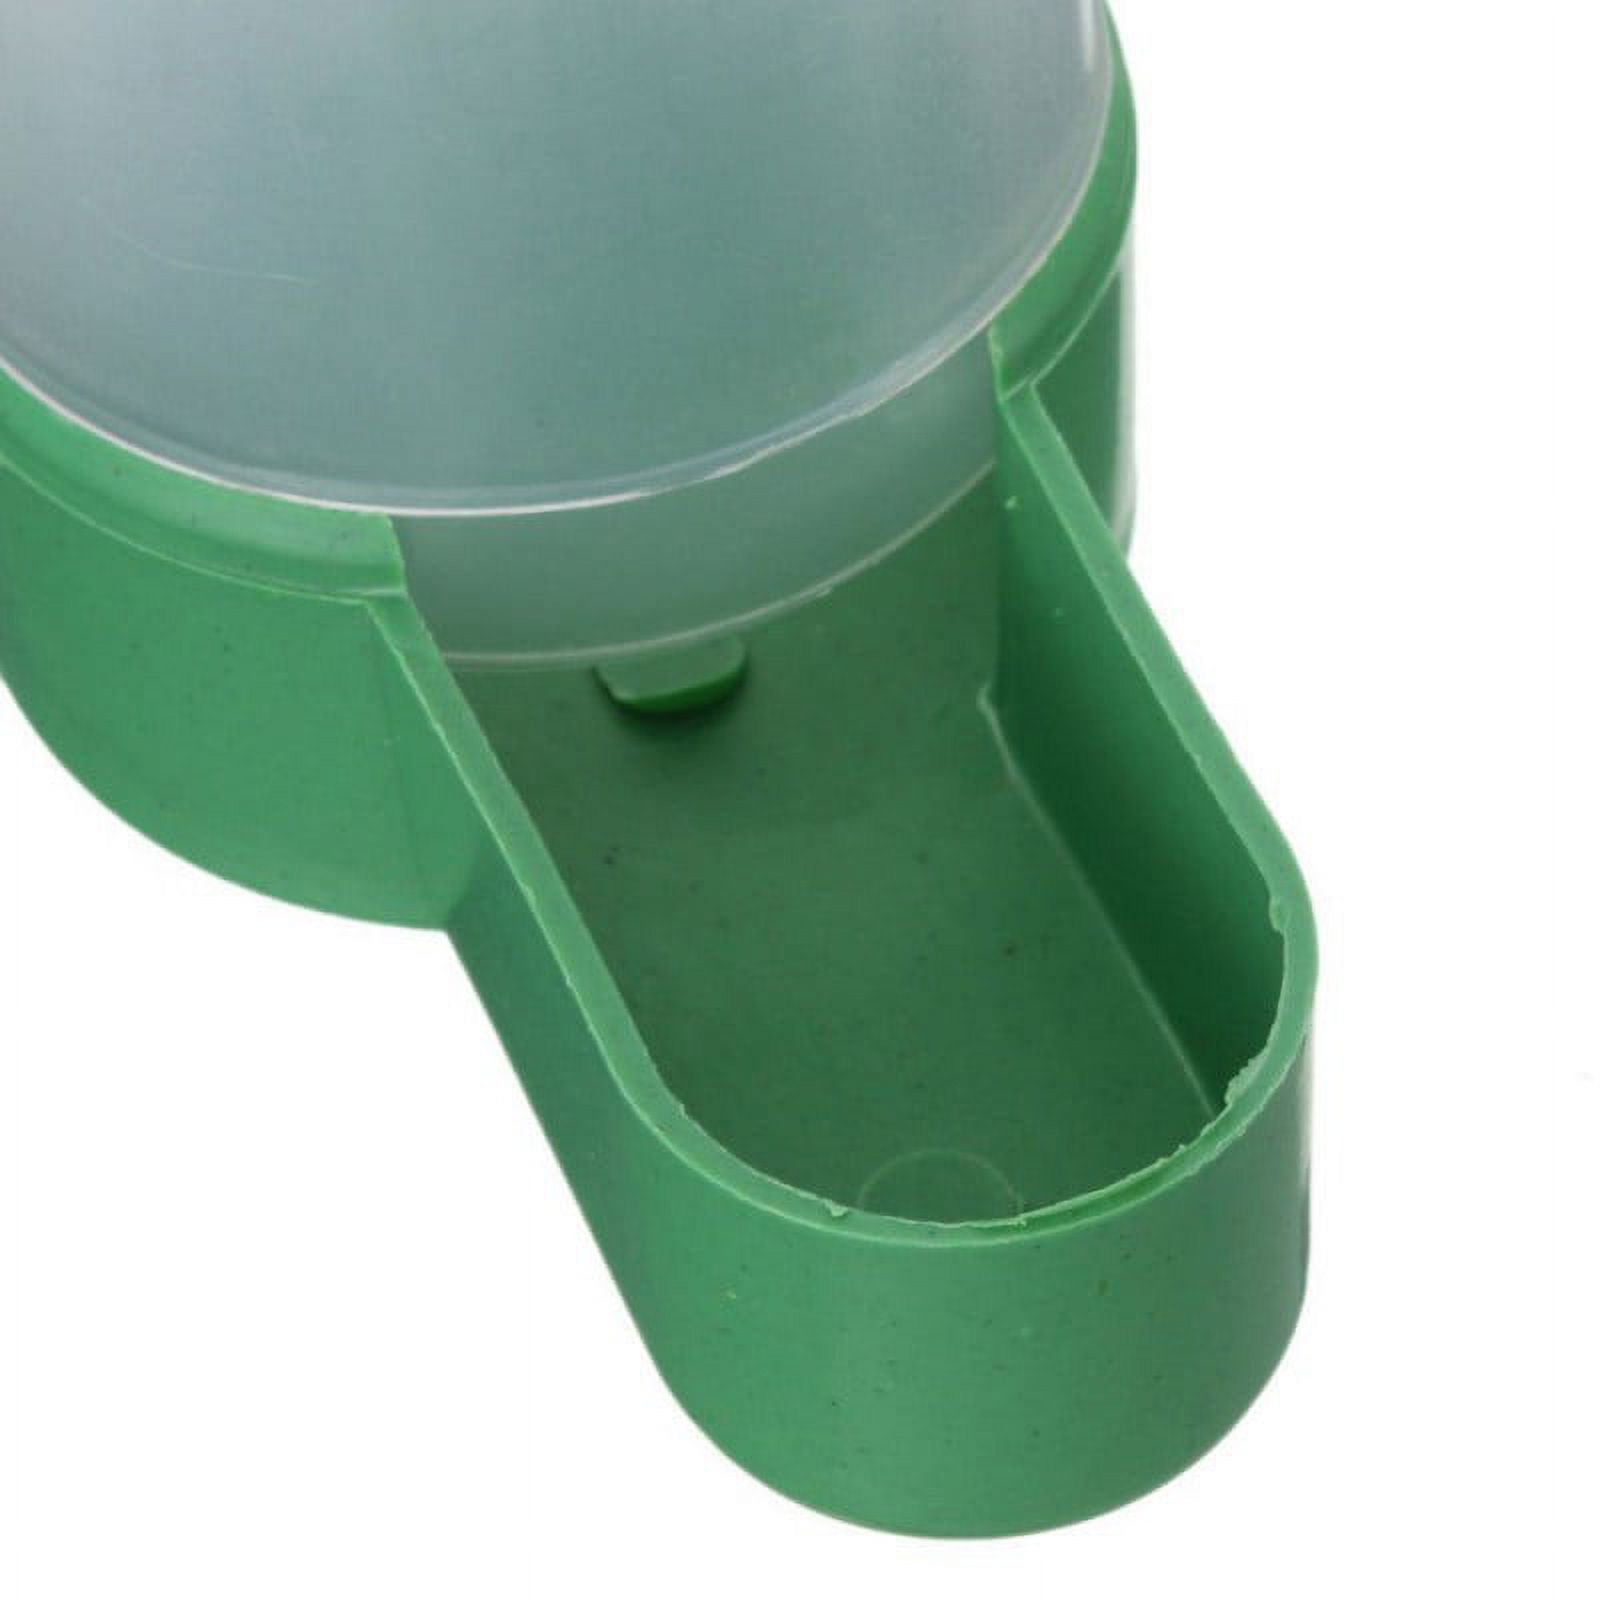 4PCS Plastic Pet Bird Drinker Feeder Water Bottle Cup For Cage Budgie Birds - image 4 of 5